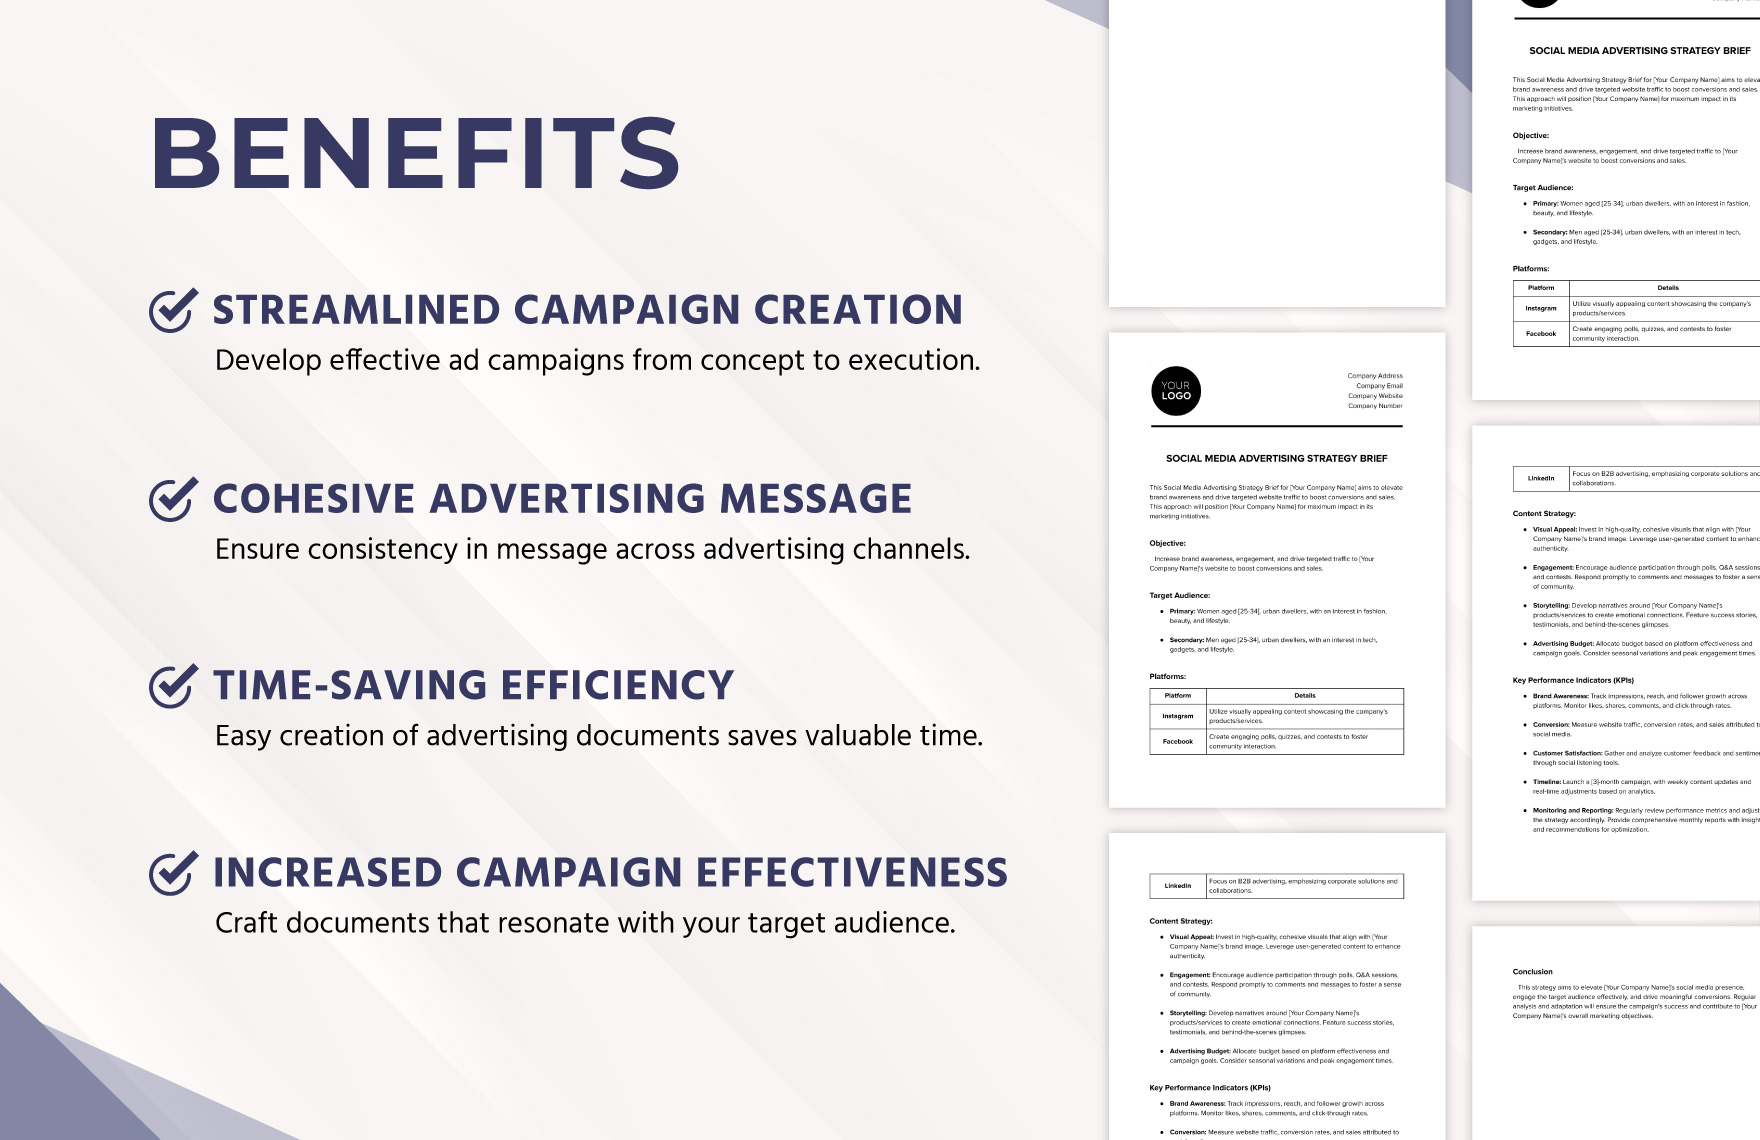 Social Media Advertising Strategy Brief Template